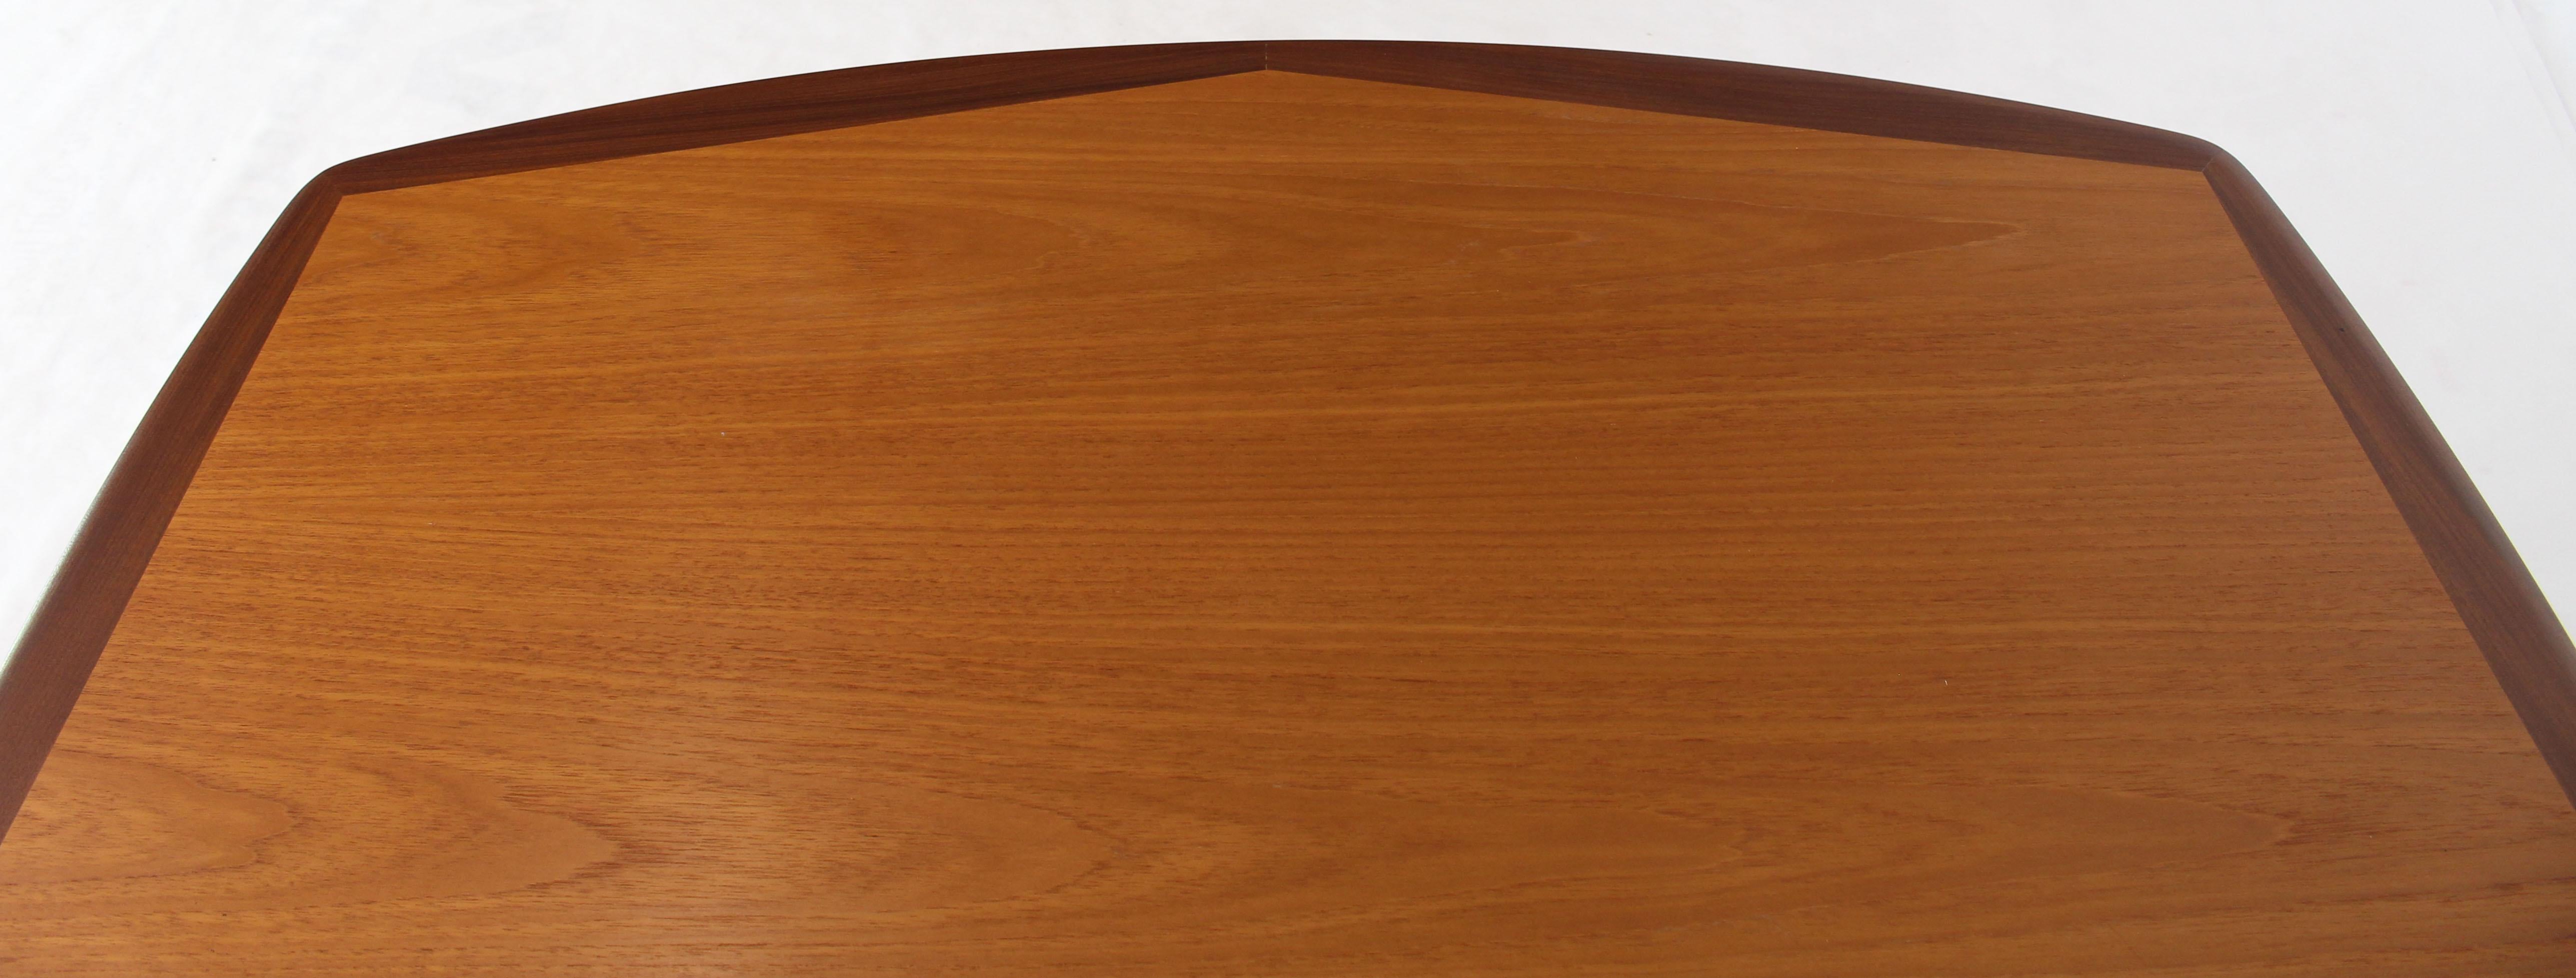 Lacquered Danish Modern Square Two-Tone Teak Dining Table with 3 Leaves